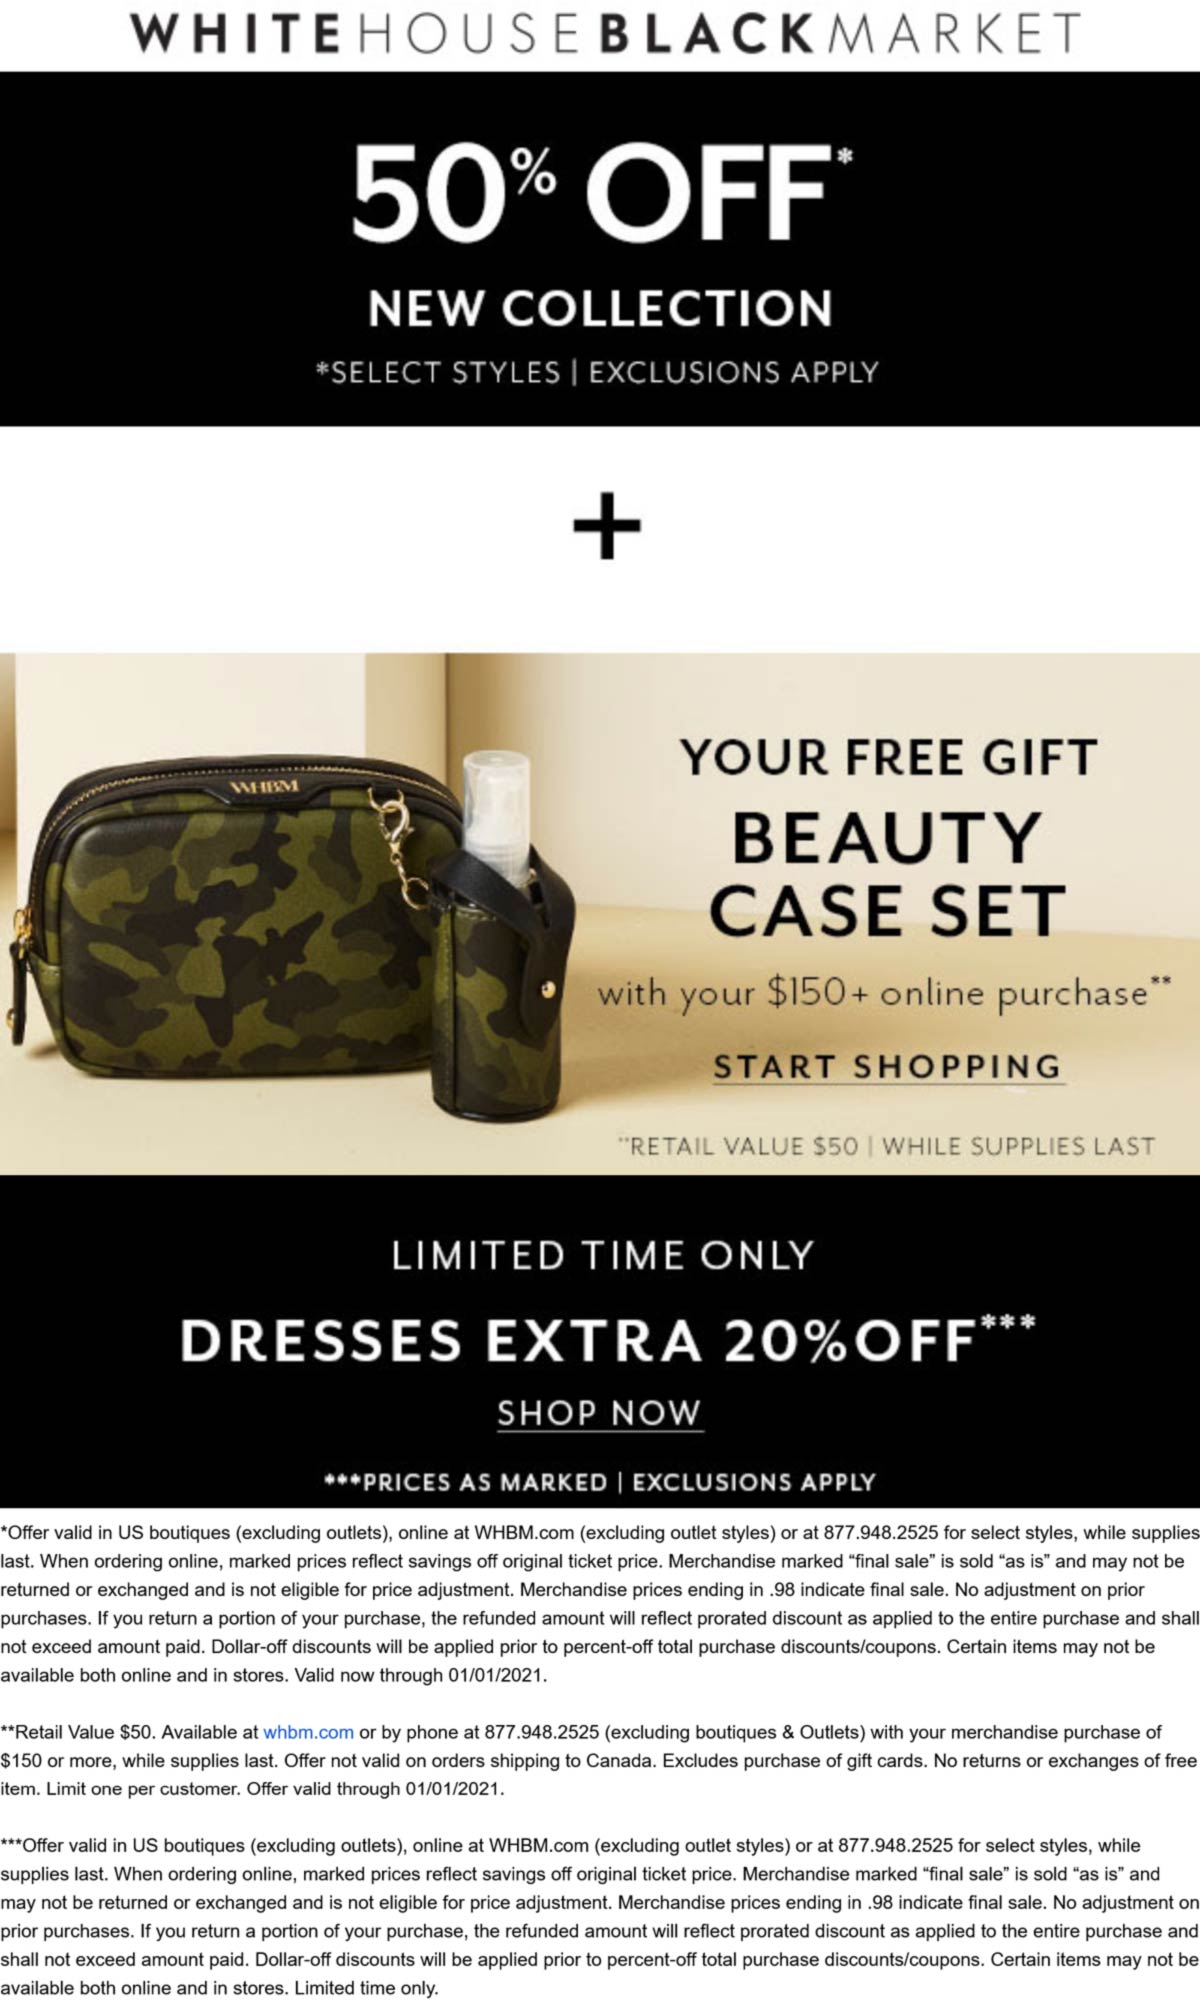 White House Black Market stores Coupon  50% off new collection + free beauty case set on $150 at White House Black Market #whitehouseblackmarket 